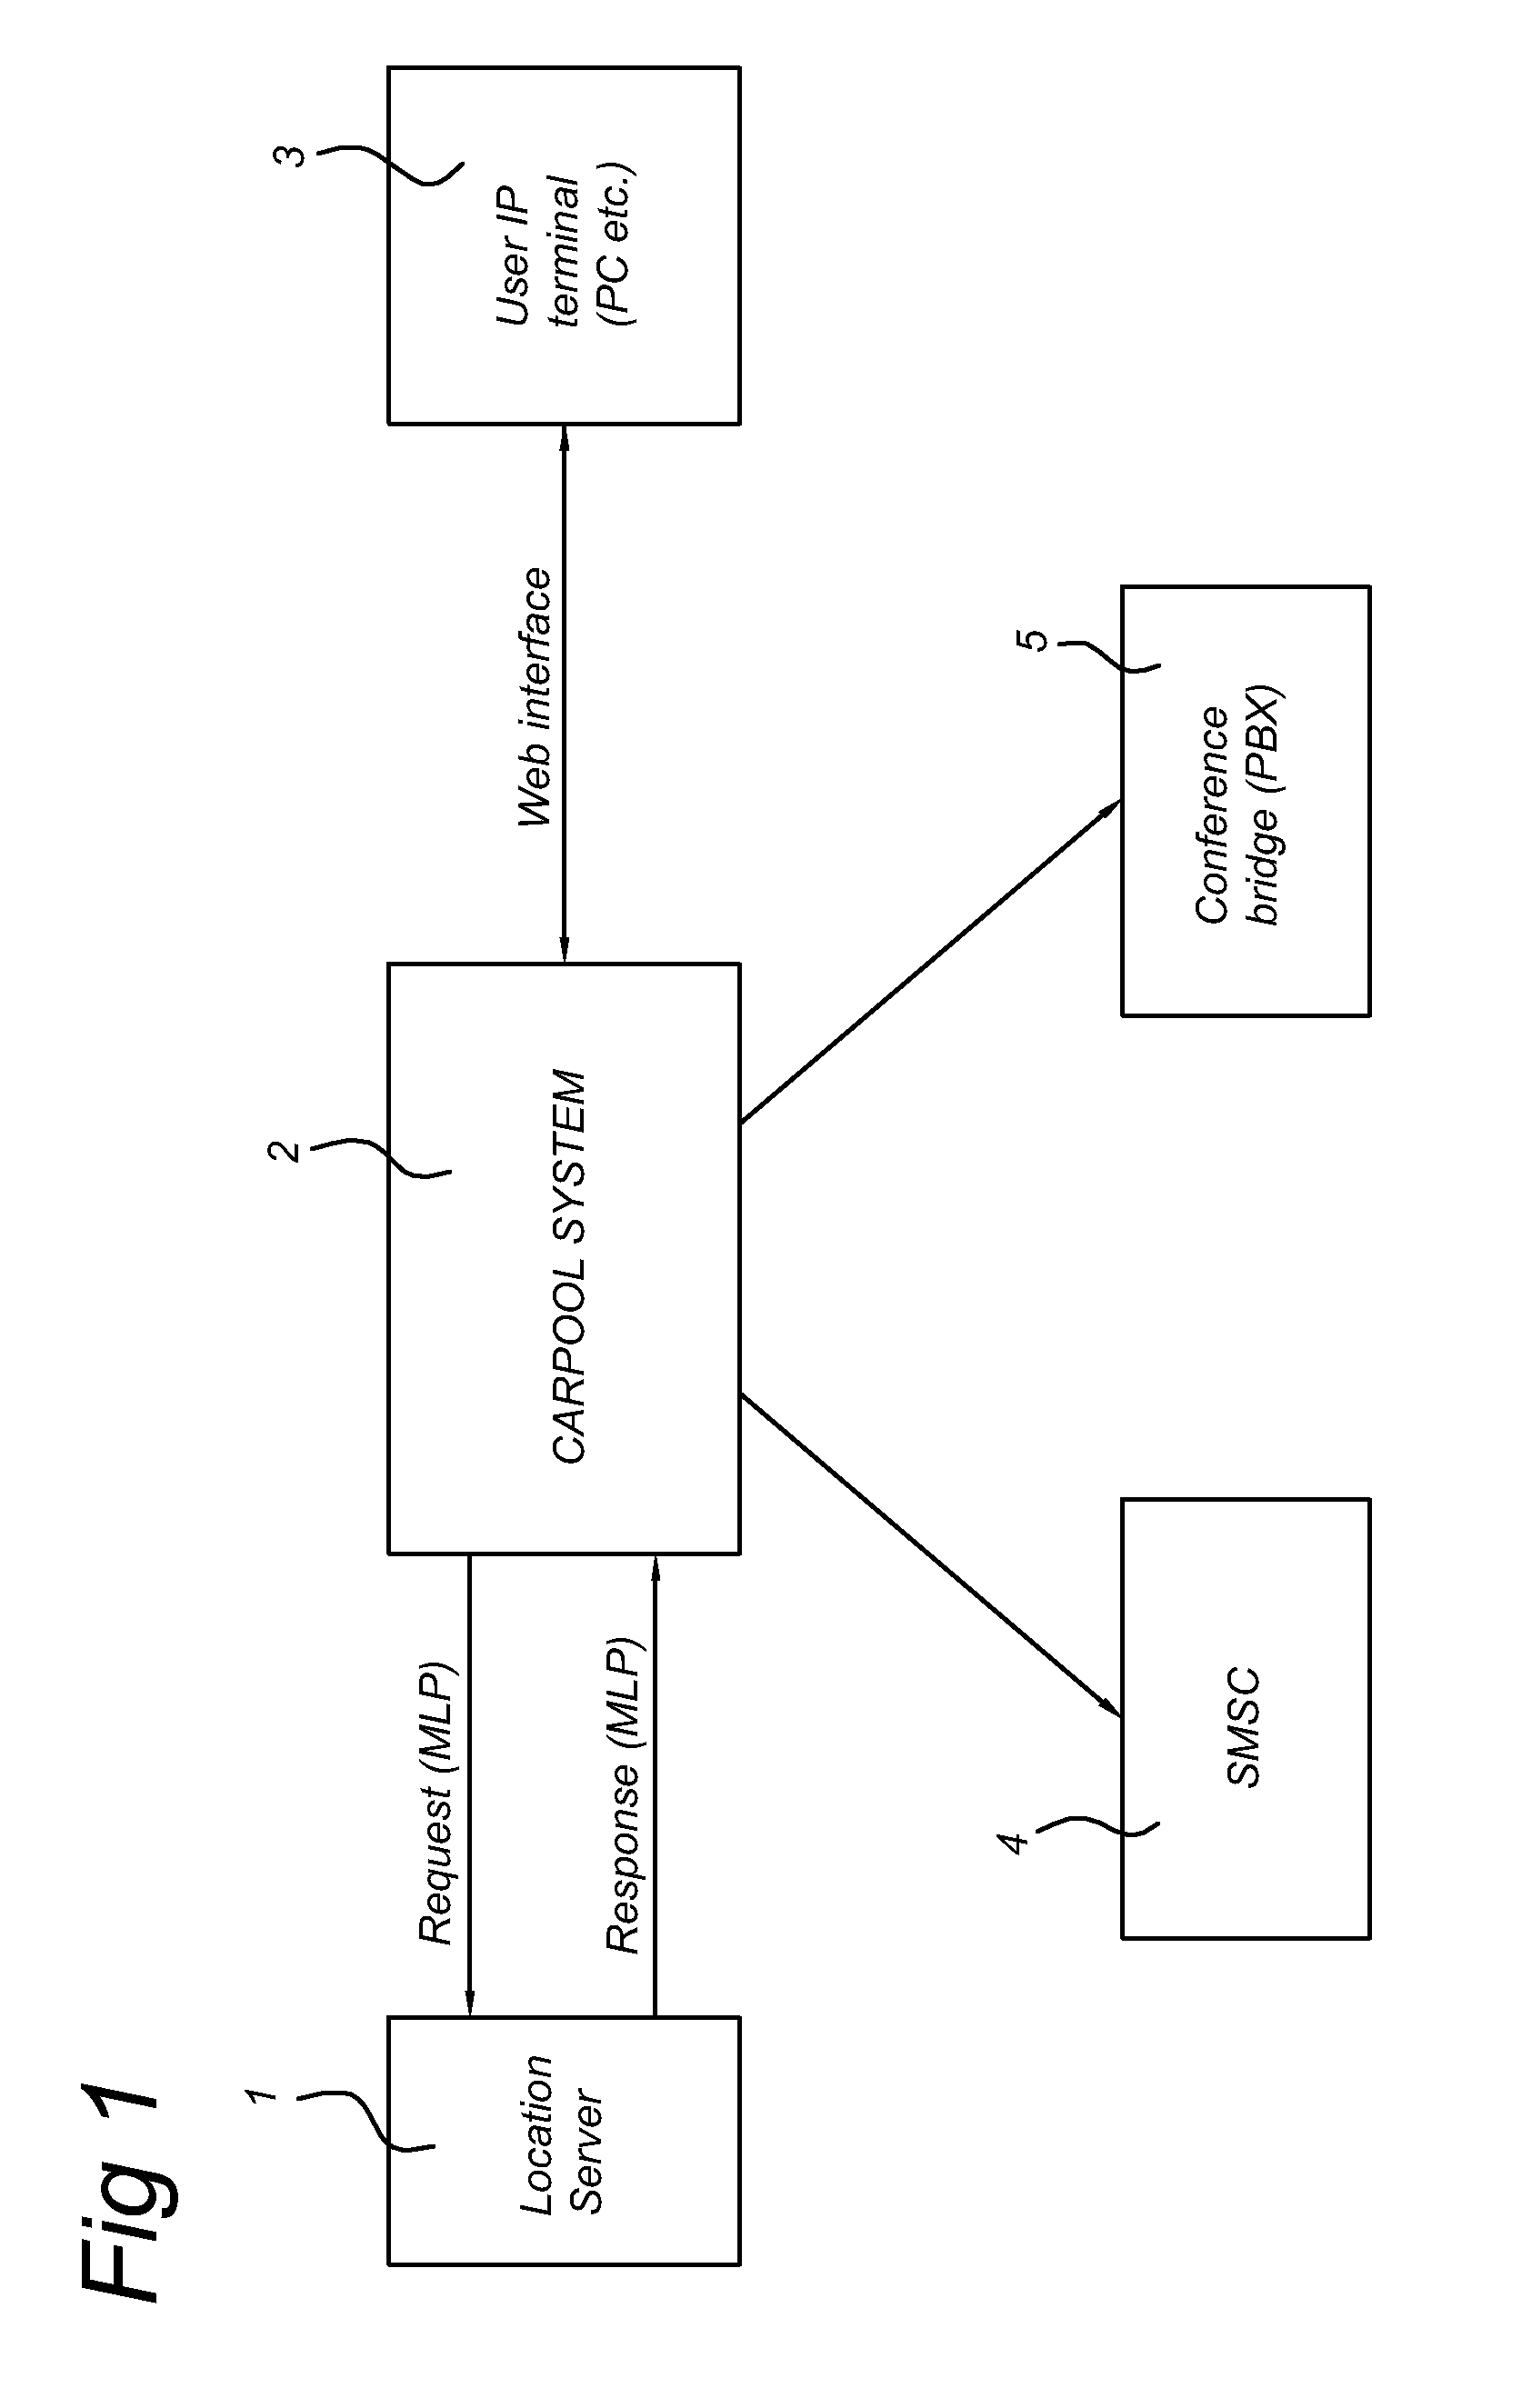  method of providing a car pooling assistance through a wireless communication system